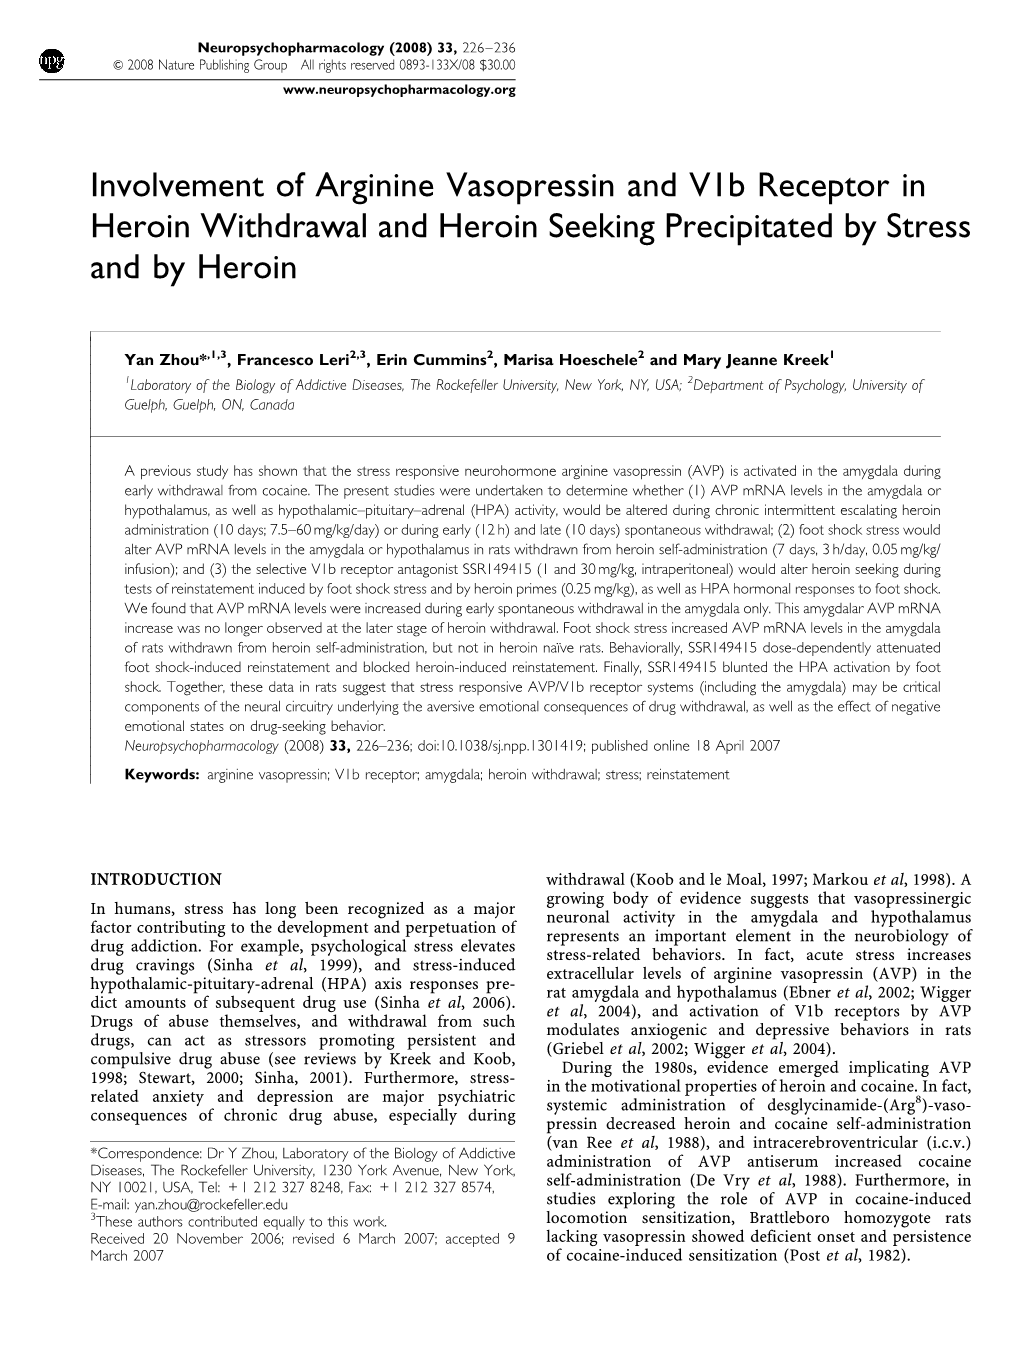 Involvement of Arginine Vasopressin and V1b Receptor in Heroin Withdrawal and Heroin Seeking Precipitated by Stress and by Heroin